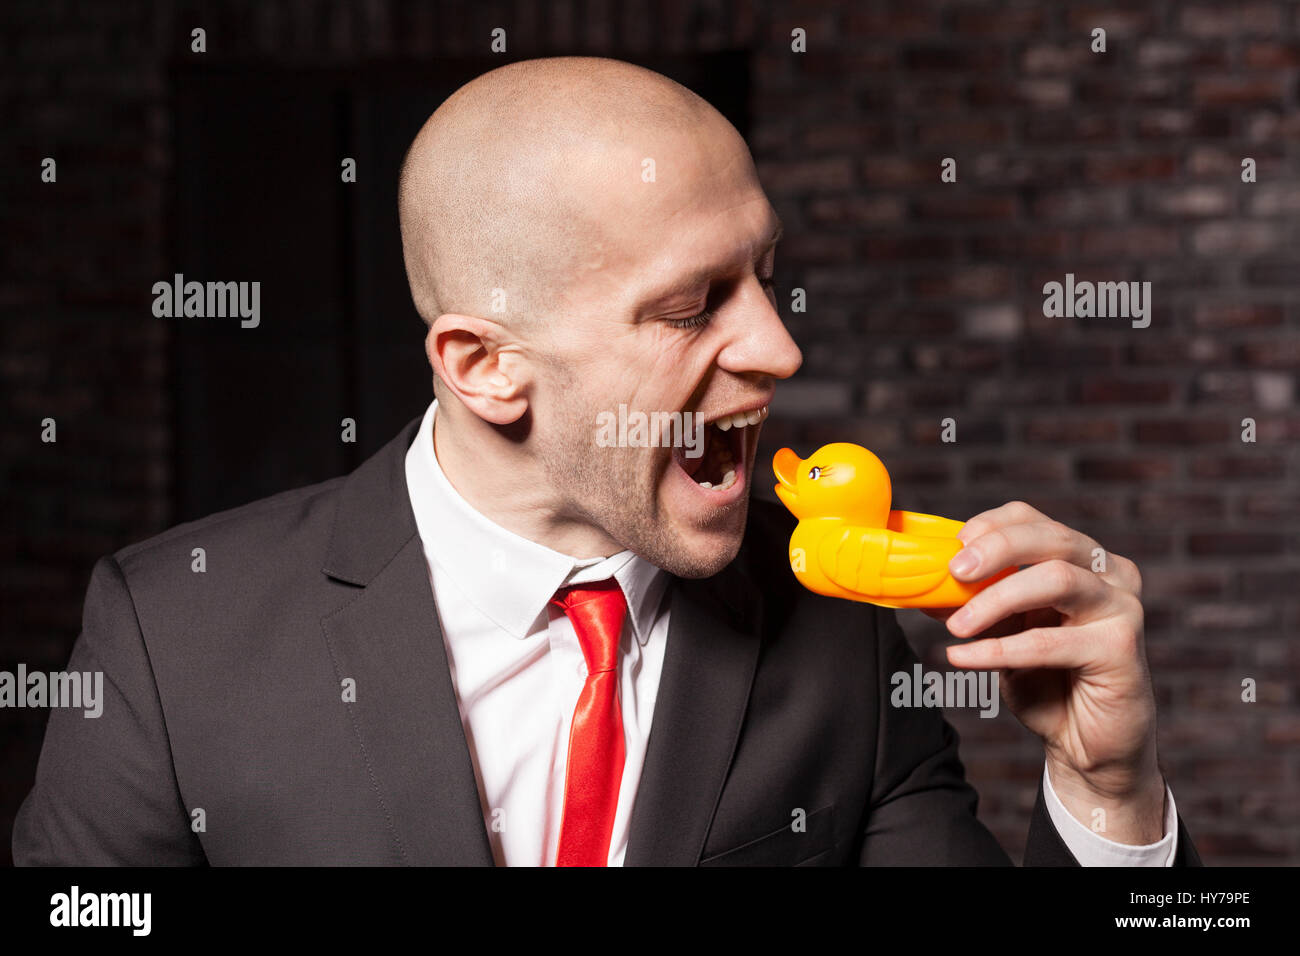 Contract killer in suit and red tie is going tp eat a little toy duck Stock Photo